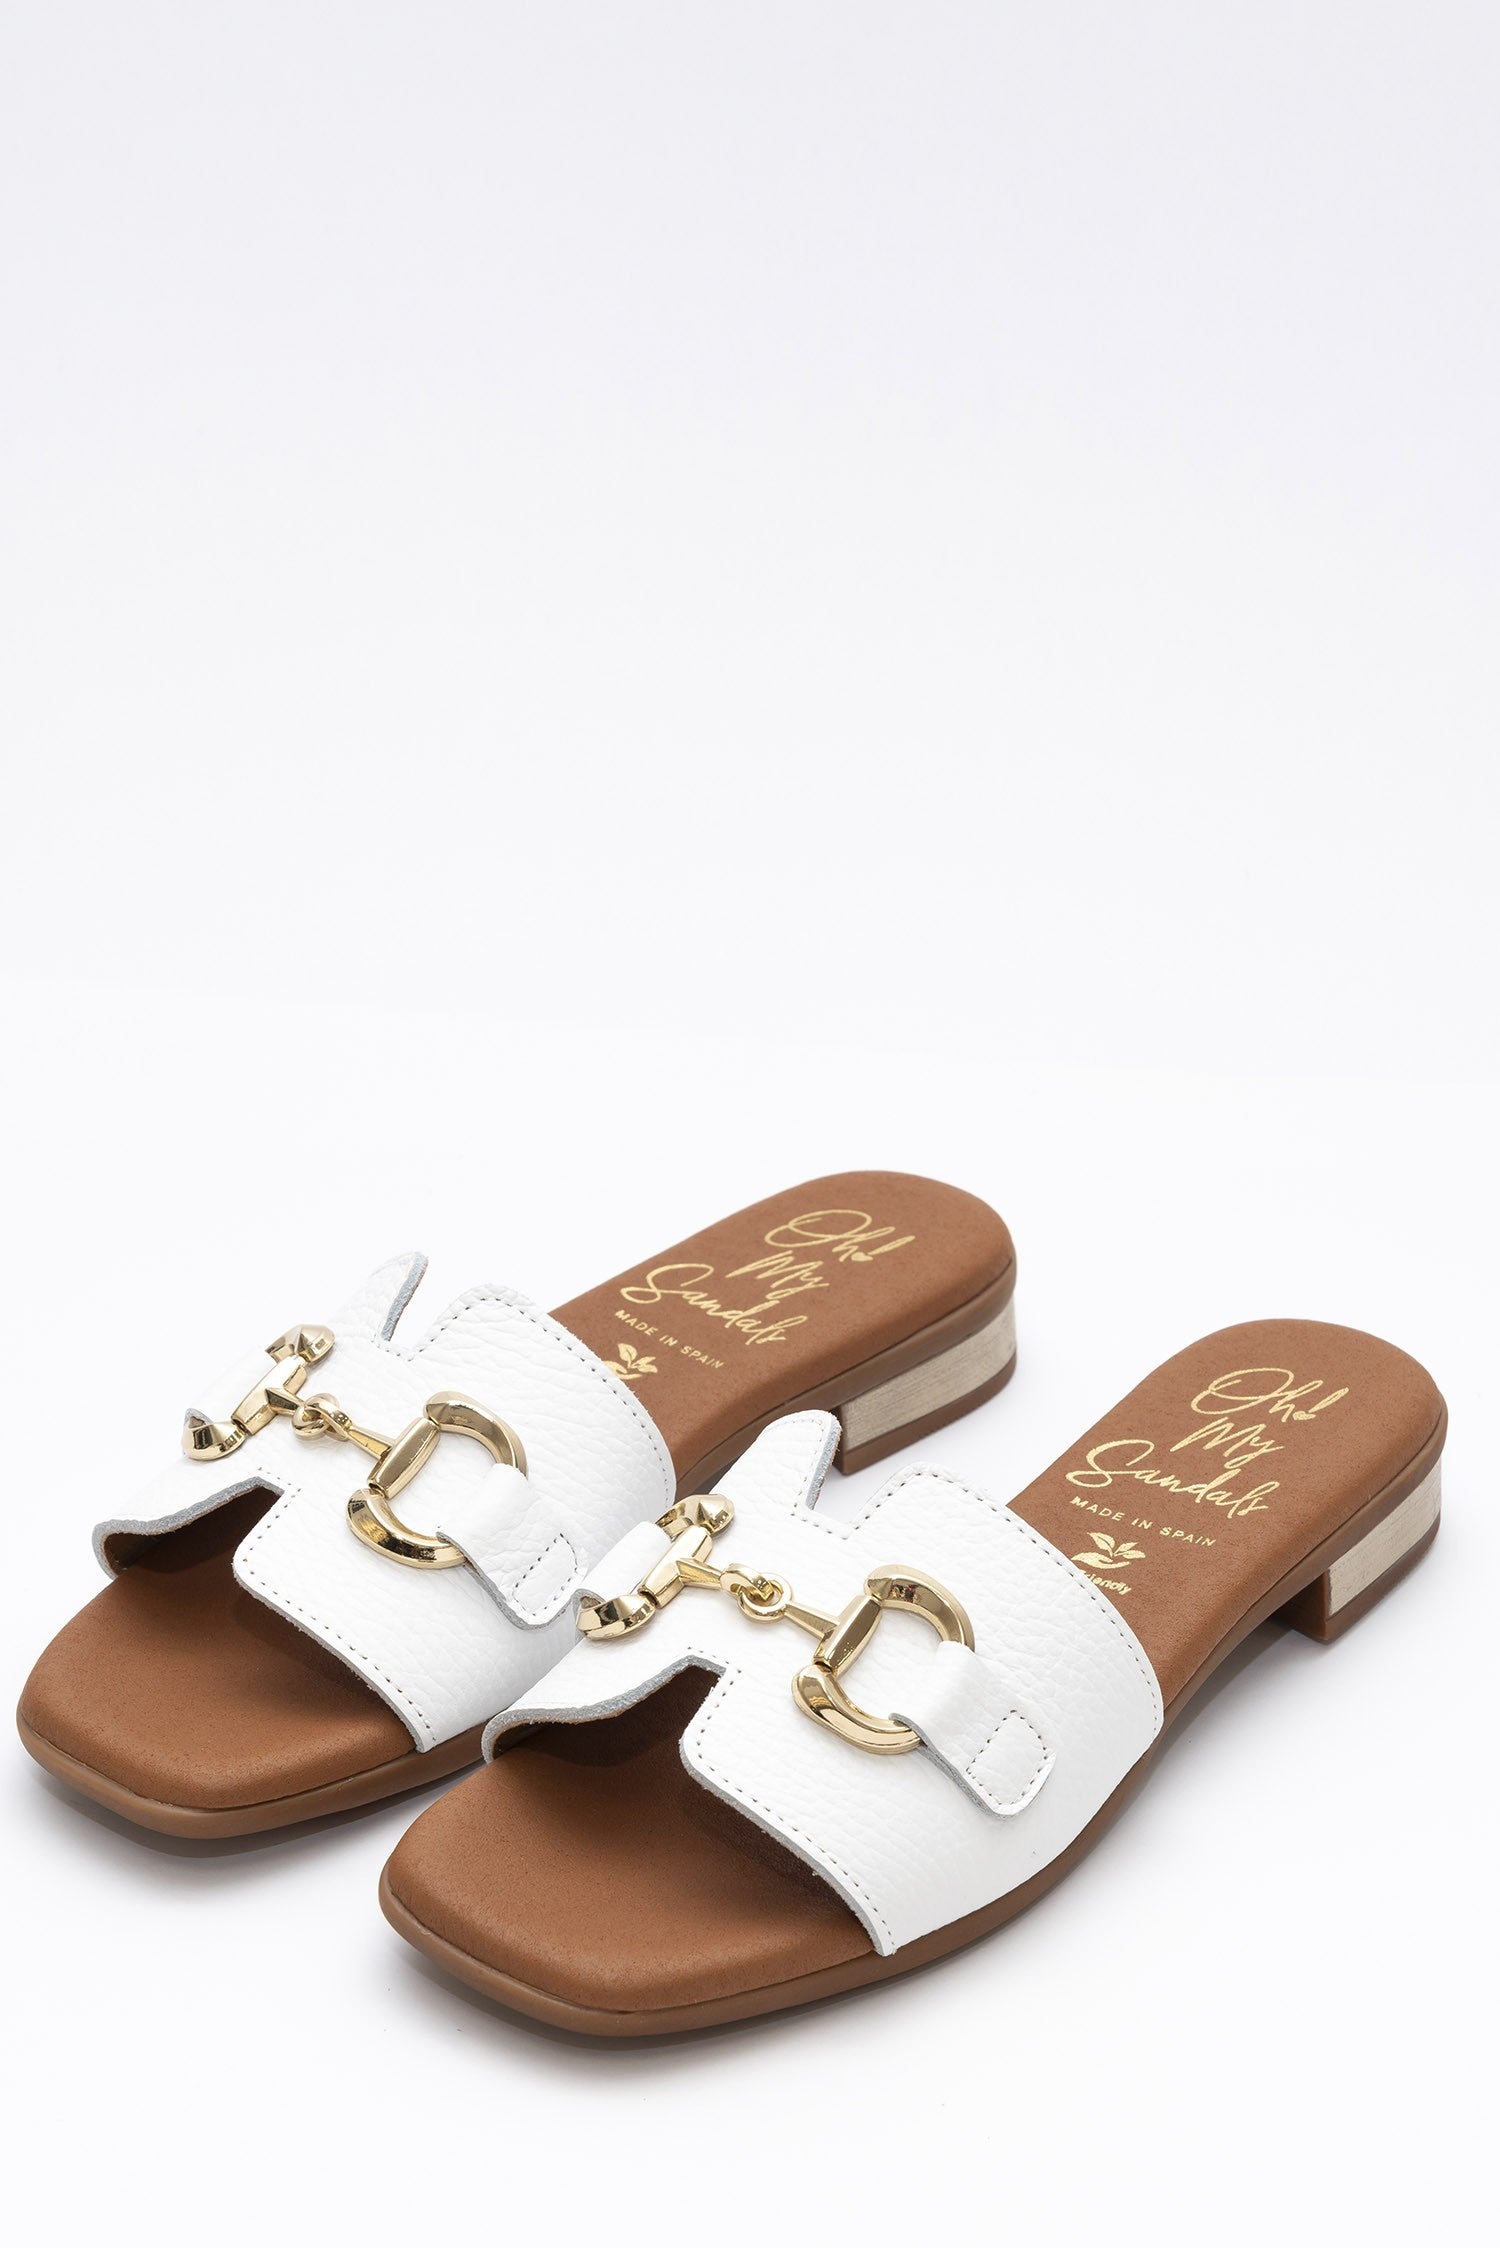 OH MY SANDALS 5340 BLANCO